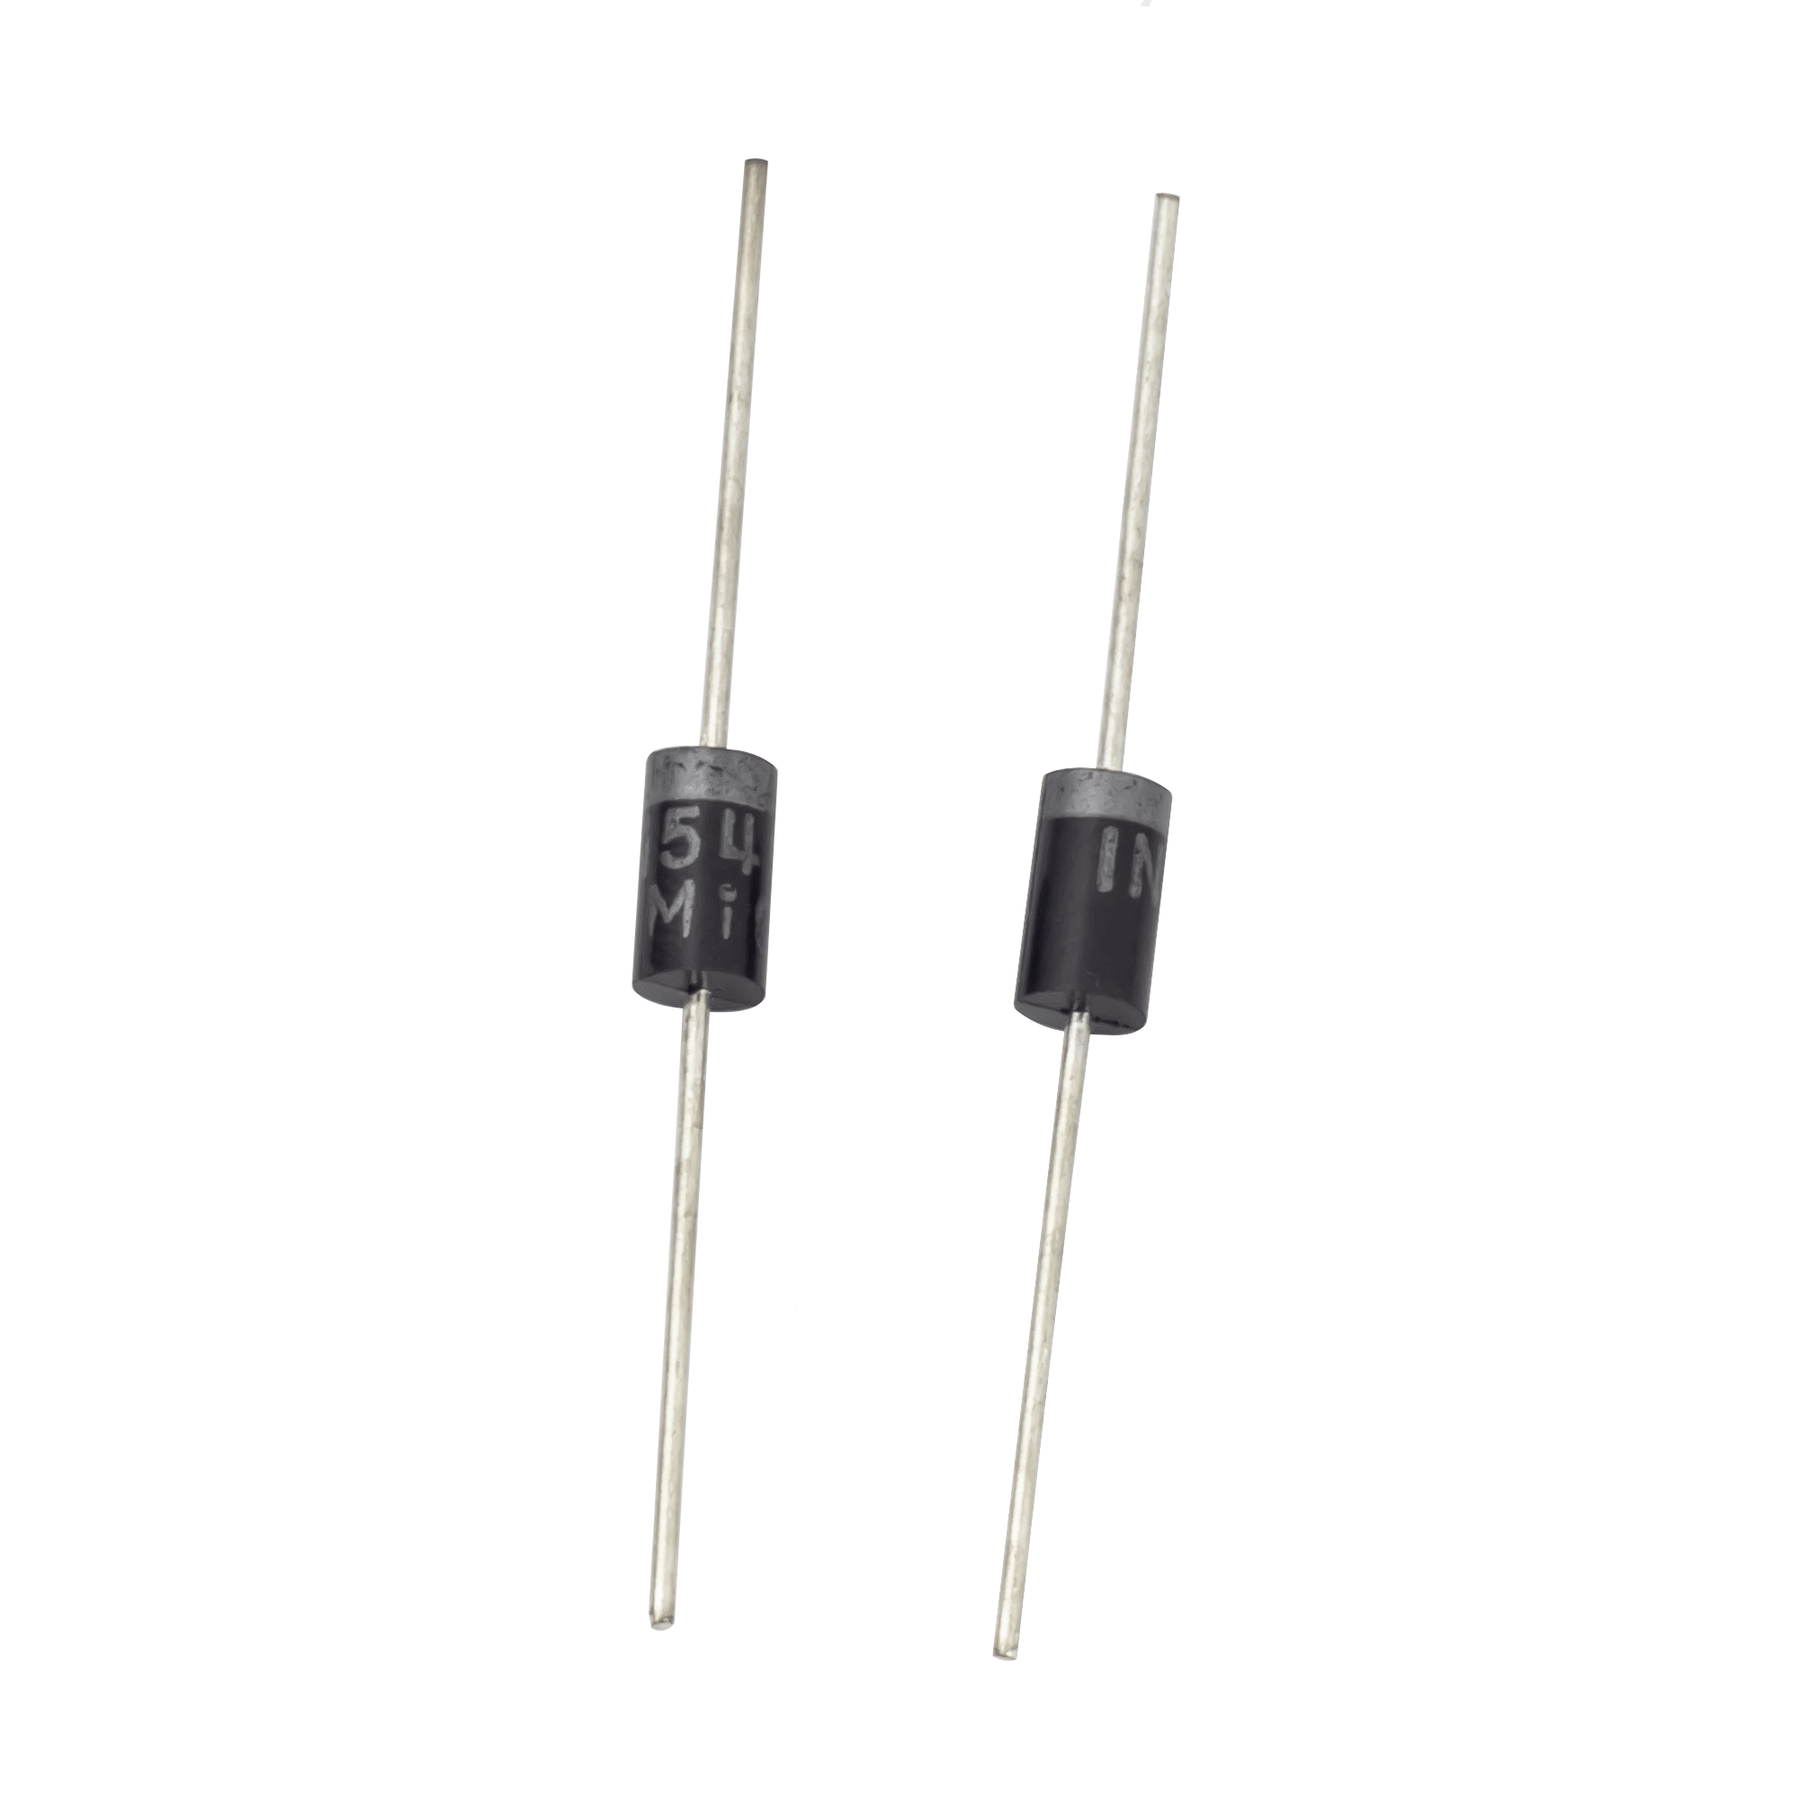 Eagle Lights Simultaneous Flash Prevention Diode Kit for LED Turn Signal